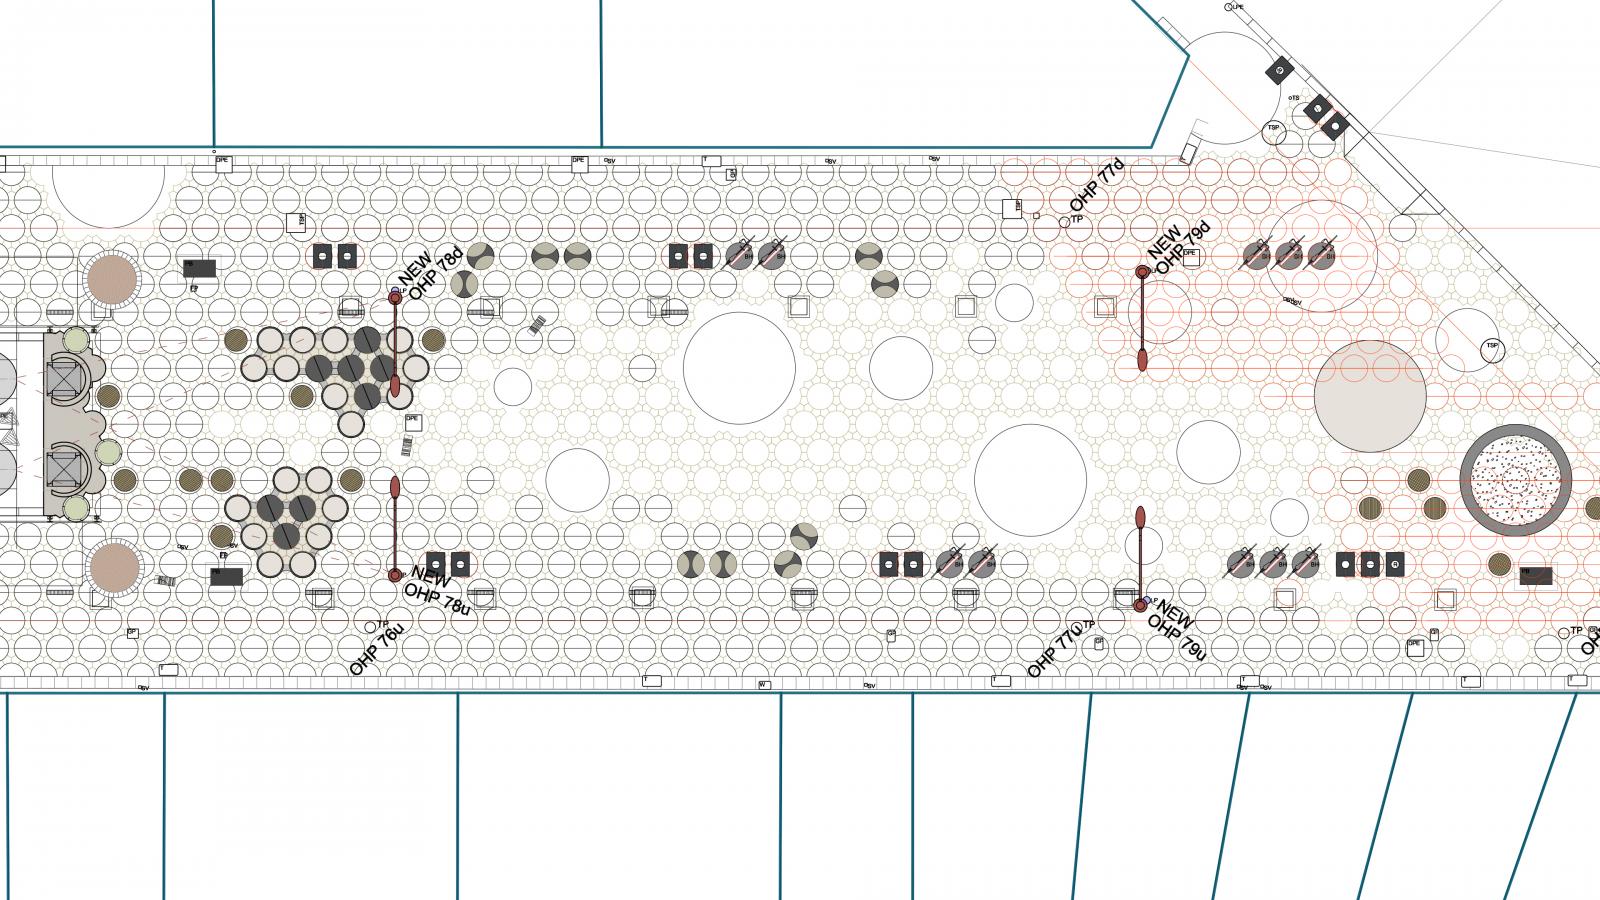 A detailed floor plan featuring a grid of circles and various rectangular marked zones. Multiple circular and rectangular tables with chairs are around. Some red and black lines and circles are outlined, likely indicating specific zones or pathways reminiscent of Acland Street in St Kilda.